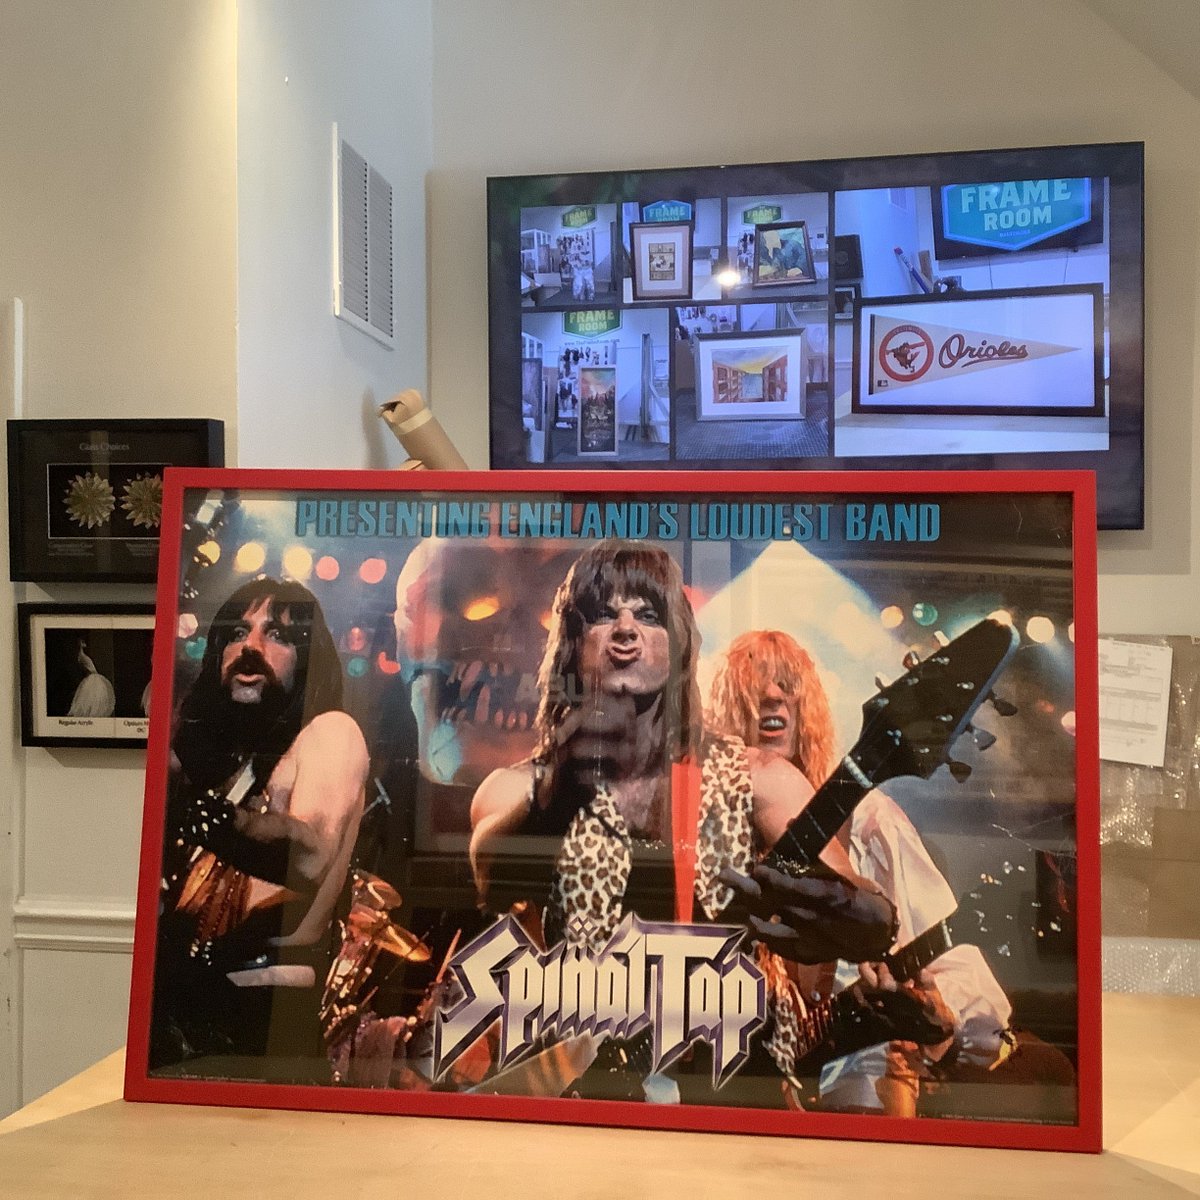 I can't keep track of all of these different bands!

#theframeroom #customframes #customframing #customframer #customframeshop #frameshop #fellspoint #baltimore #spinal #tap